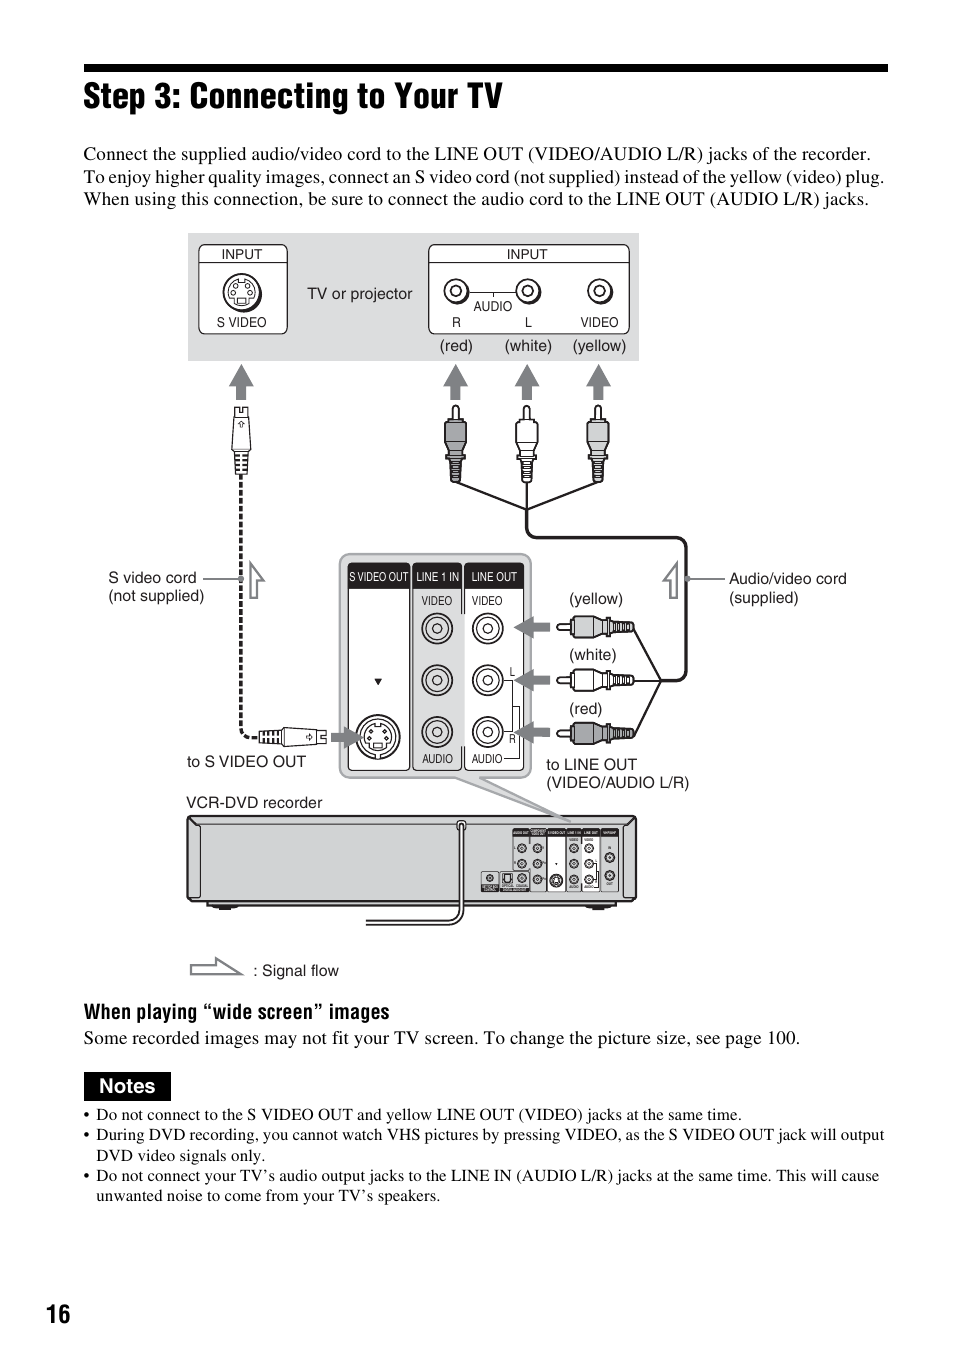 Step 3: connecting to your tv, When playing “wide screen” images | Sony RDR-VX521 User Manual | Page 16 / 132